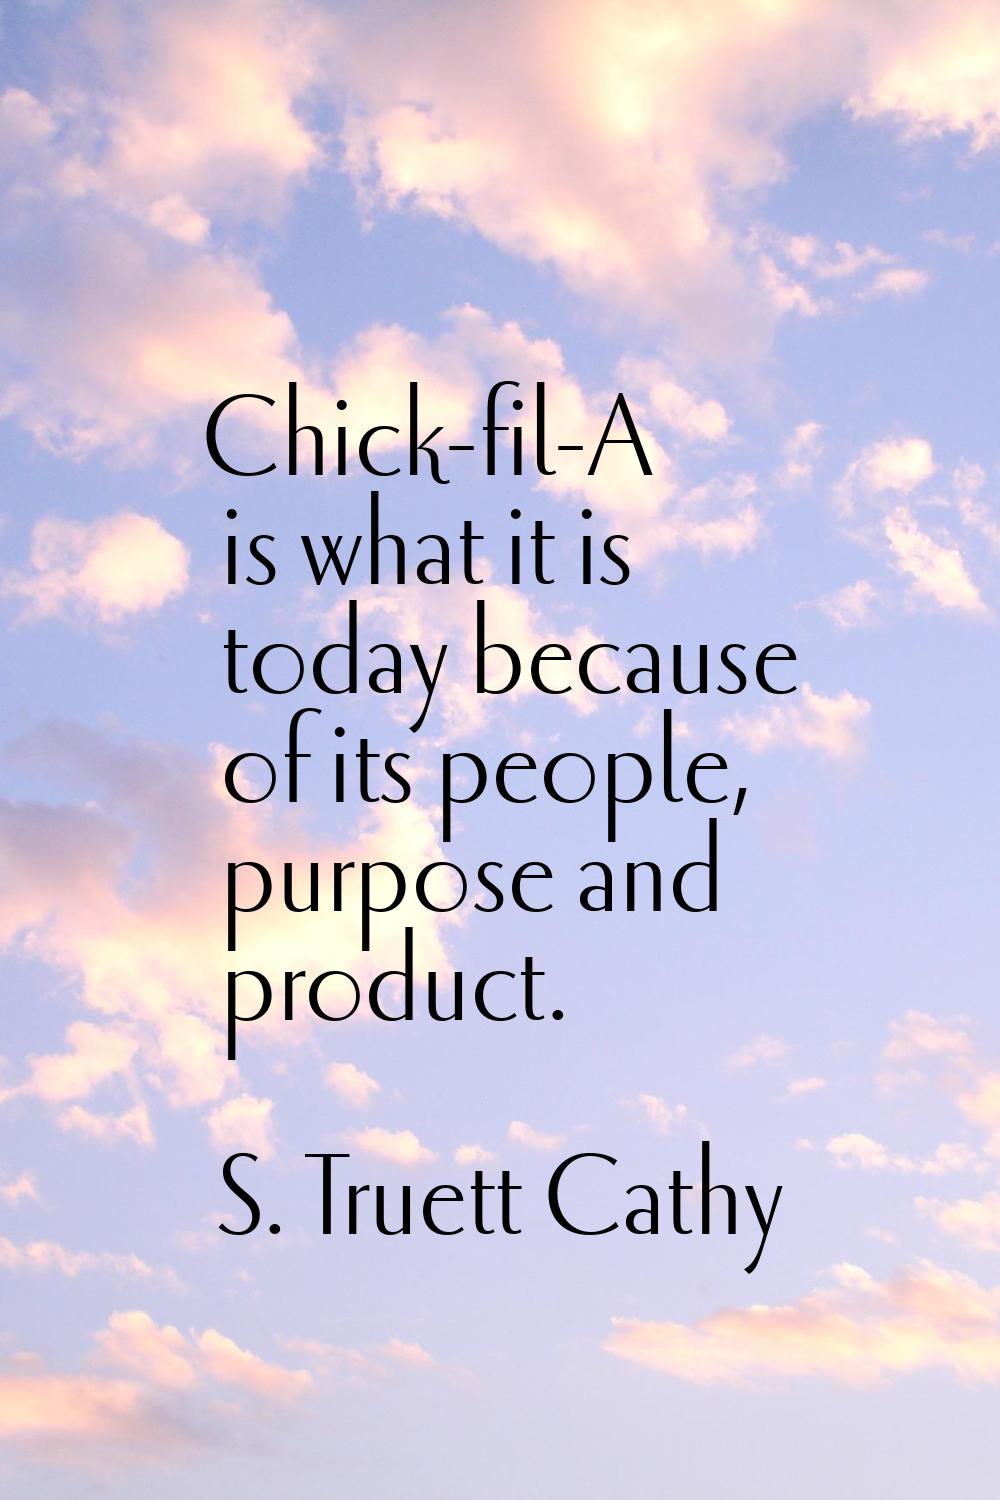 Chick-fil-A is what it is today because of its people, purpose and product.